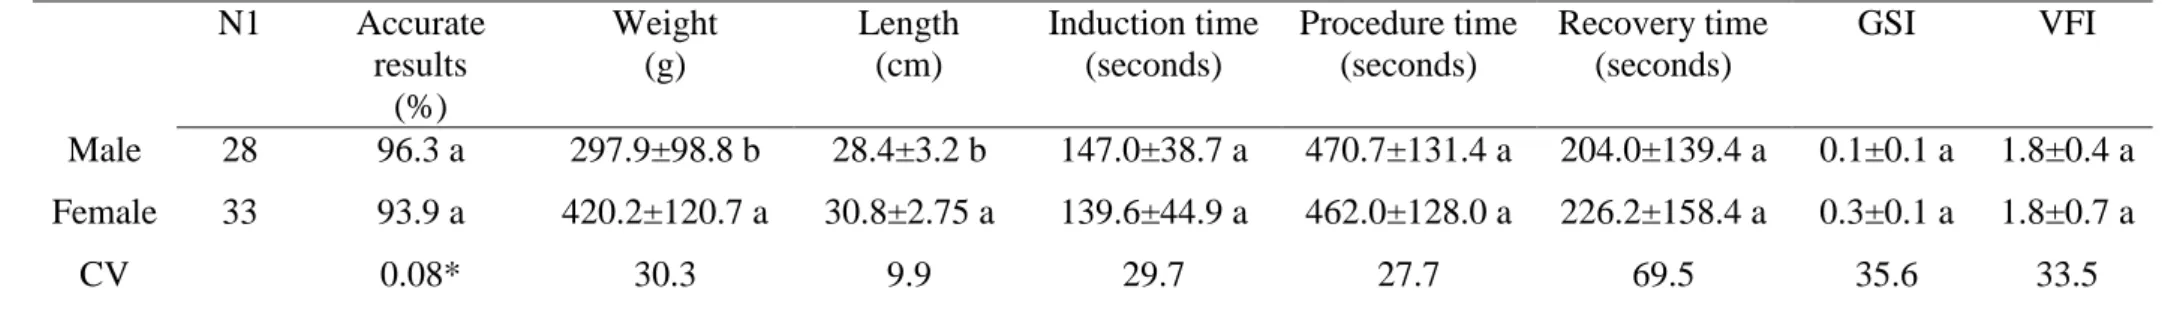 Table  2.  Values  for  sexing  accuracy,  weight,  length,  anesthesia  induction  time,  procedure  time,  recovery  time),  gonadosomatic  index  (GSI),  viscerosomatic fat index (VFI), and intestinal coefficient (IC) of Lophiosilurus alexandri submitte